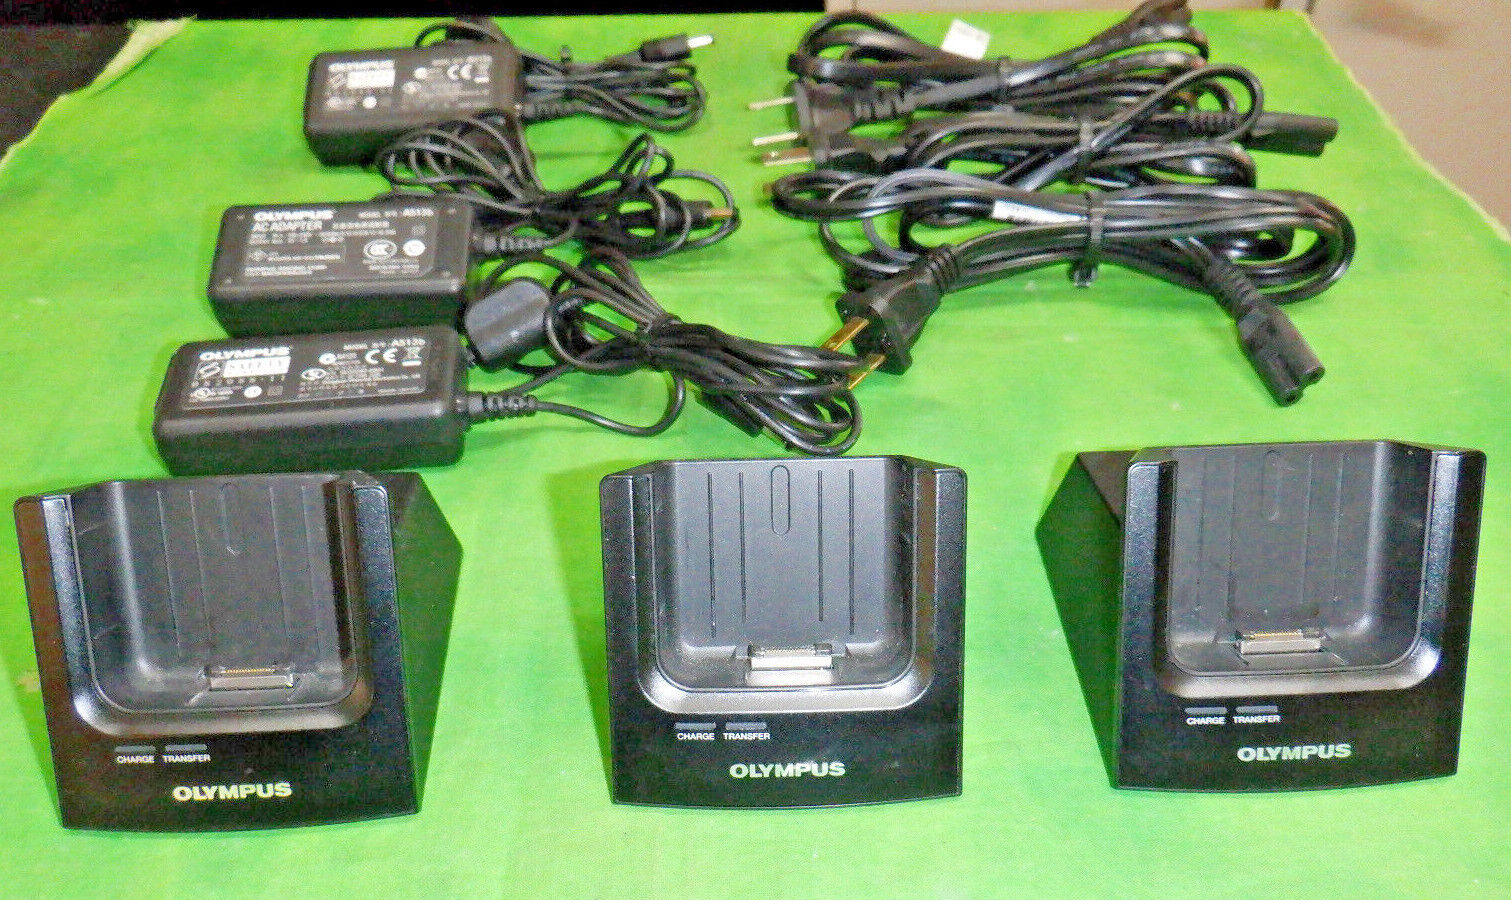 Olympus CR10 USB Cradle Dock 5V AC Adapter A513b for DS5000 DS-5000iD   LOT OF 3 OLYMPUS CR10